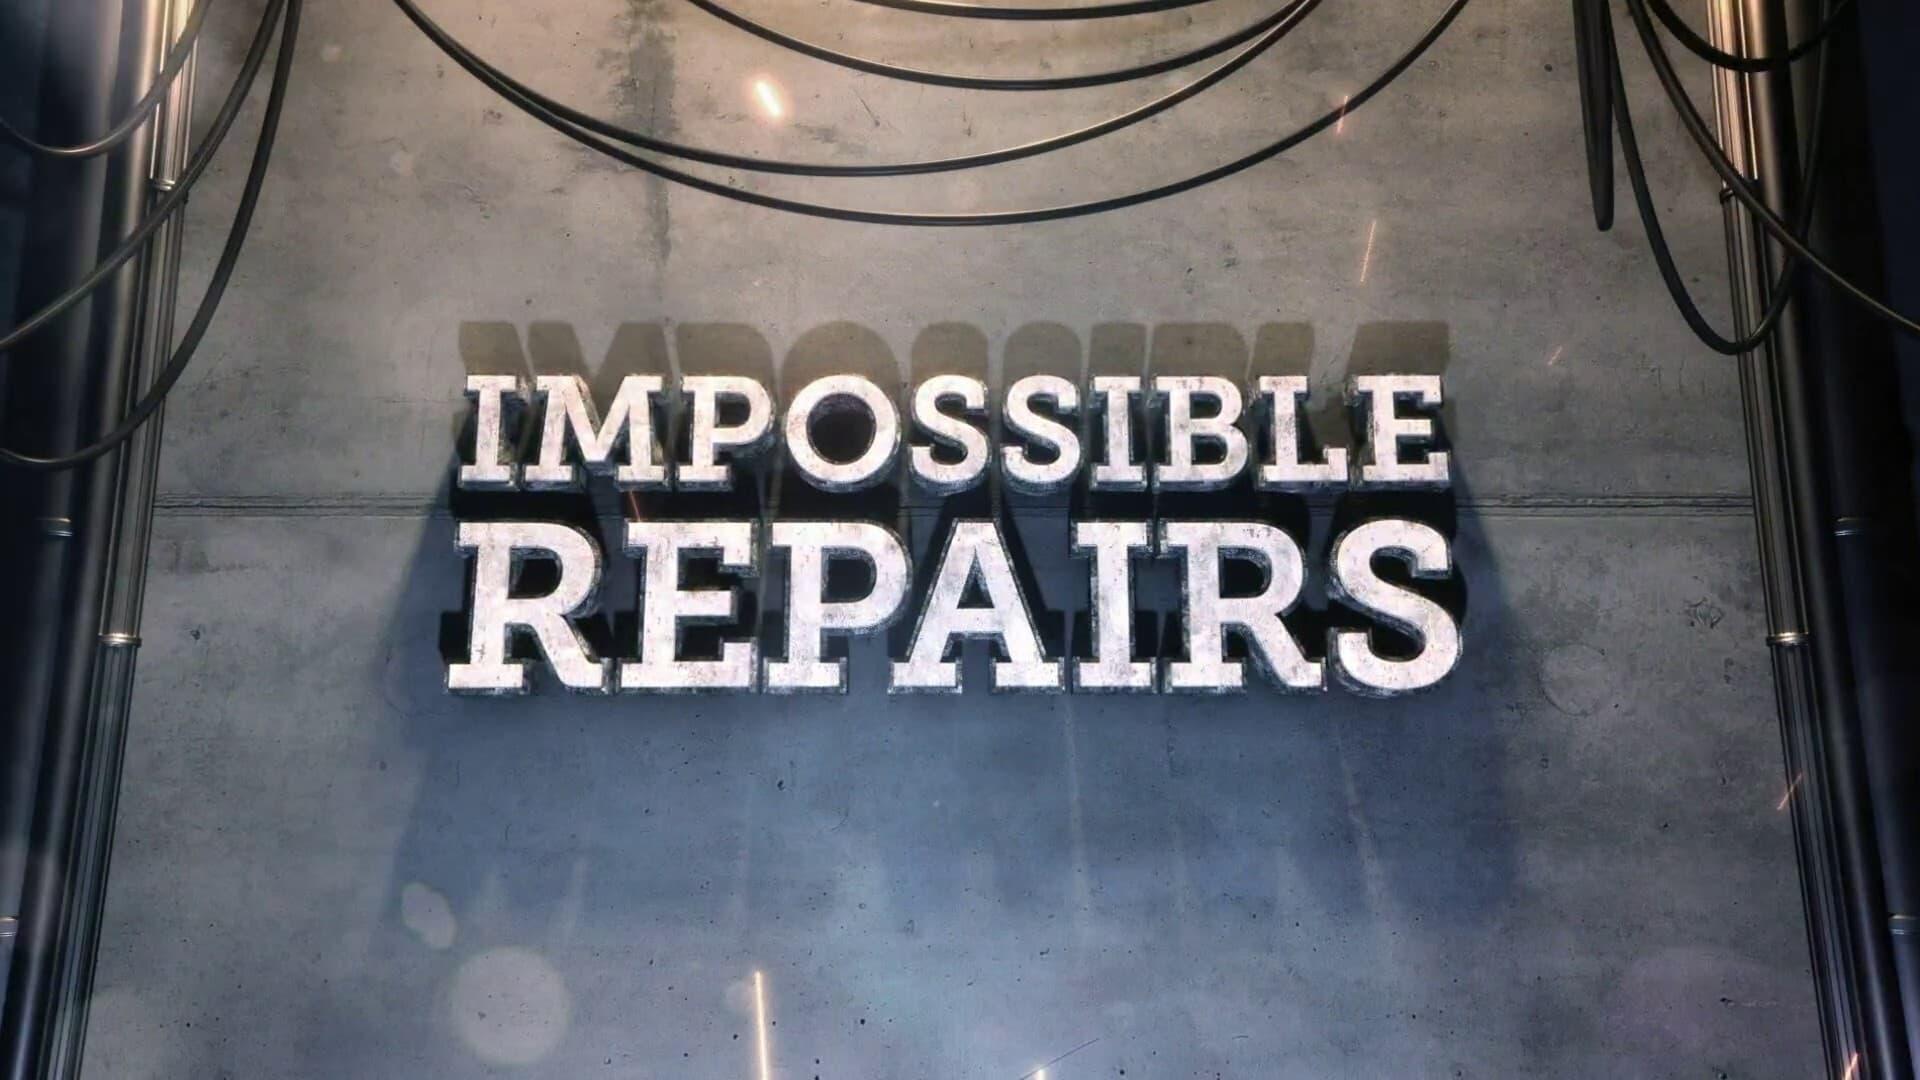 Impossible Repairs backdrop